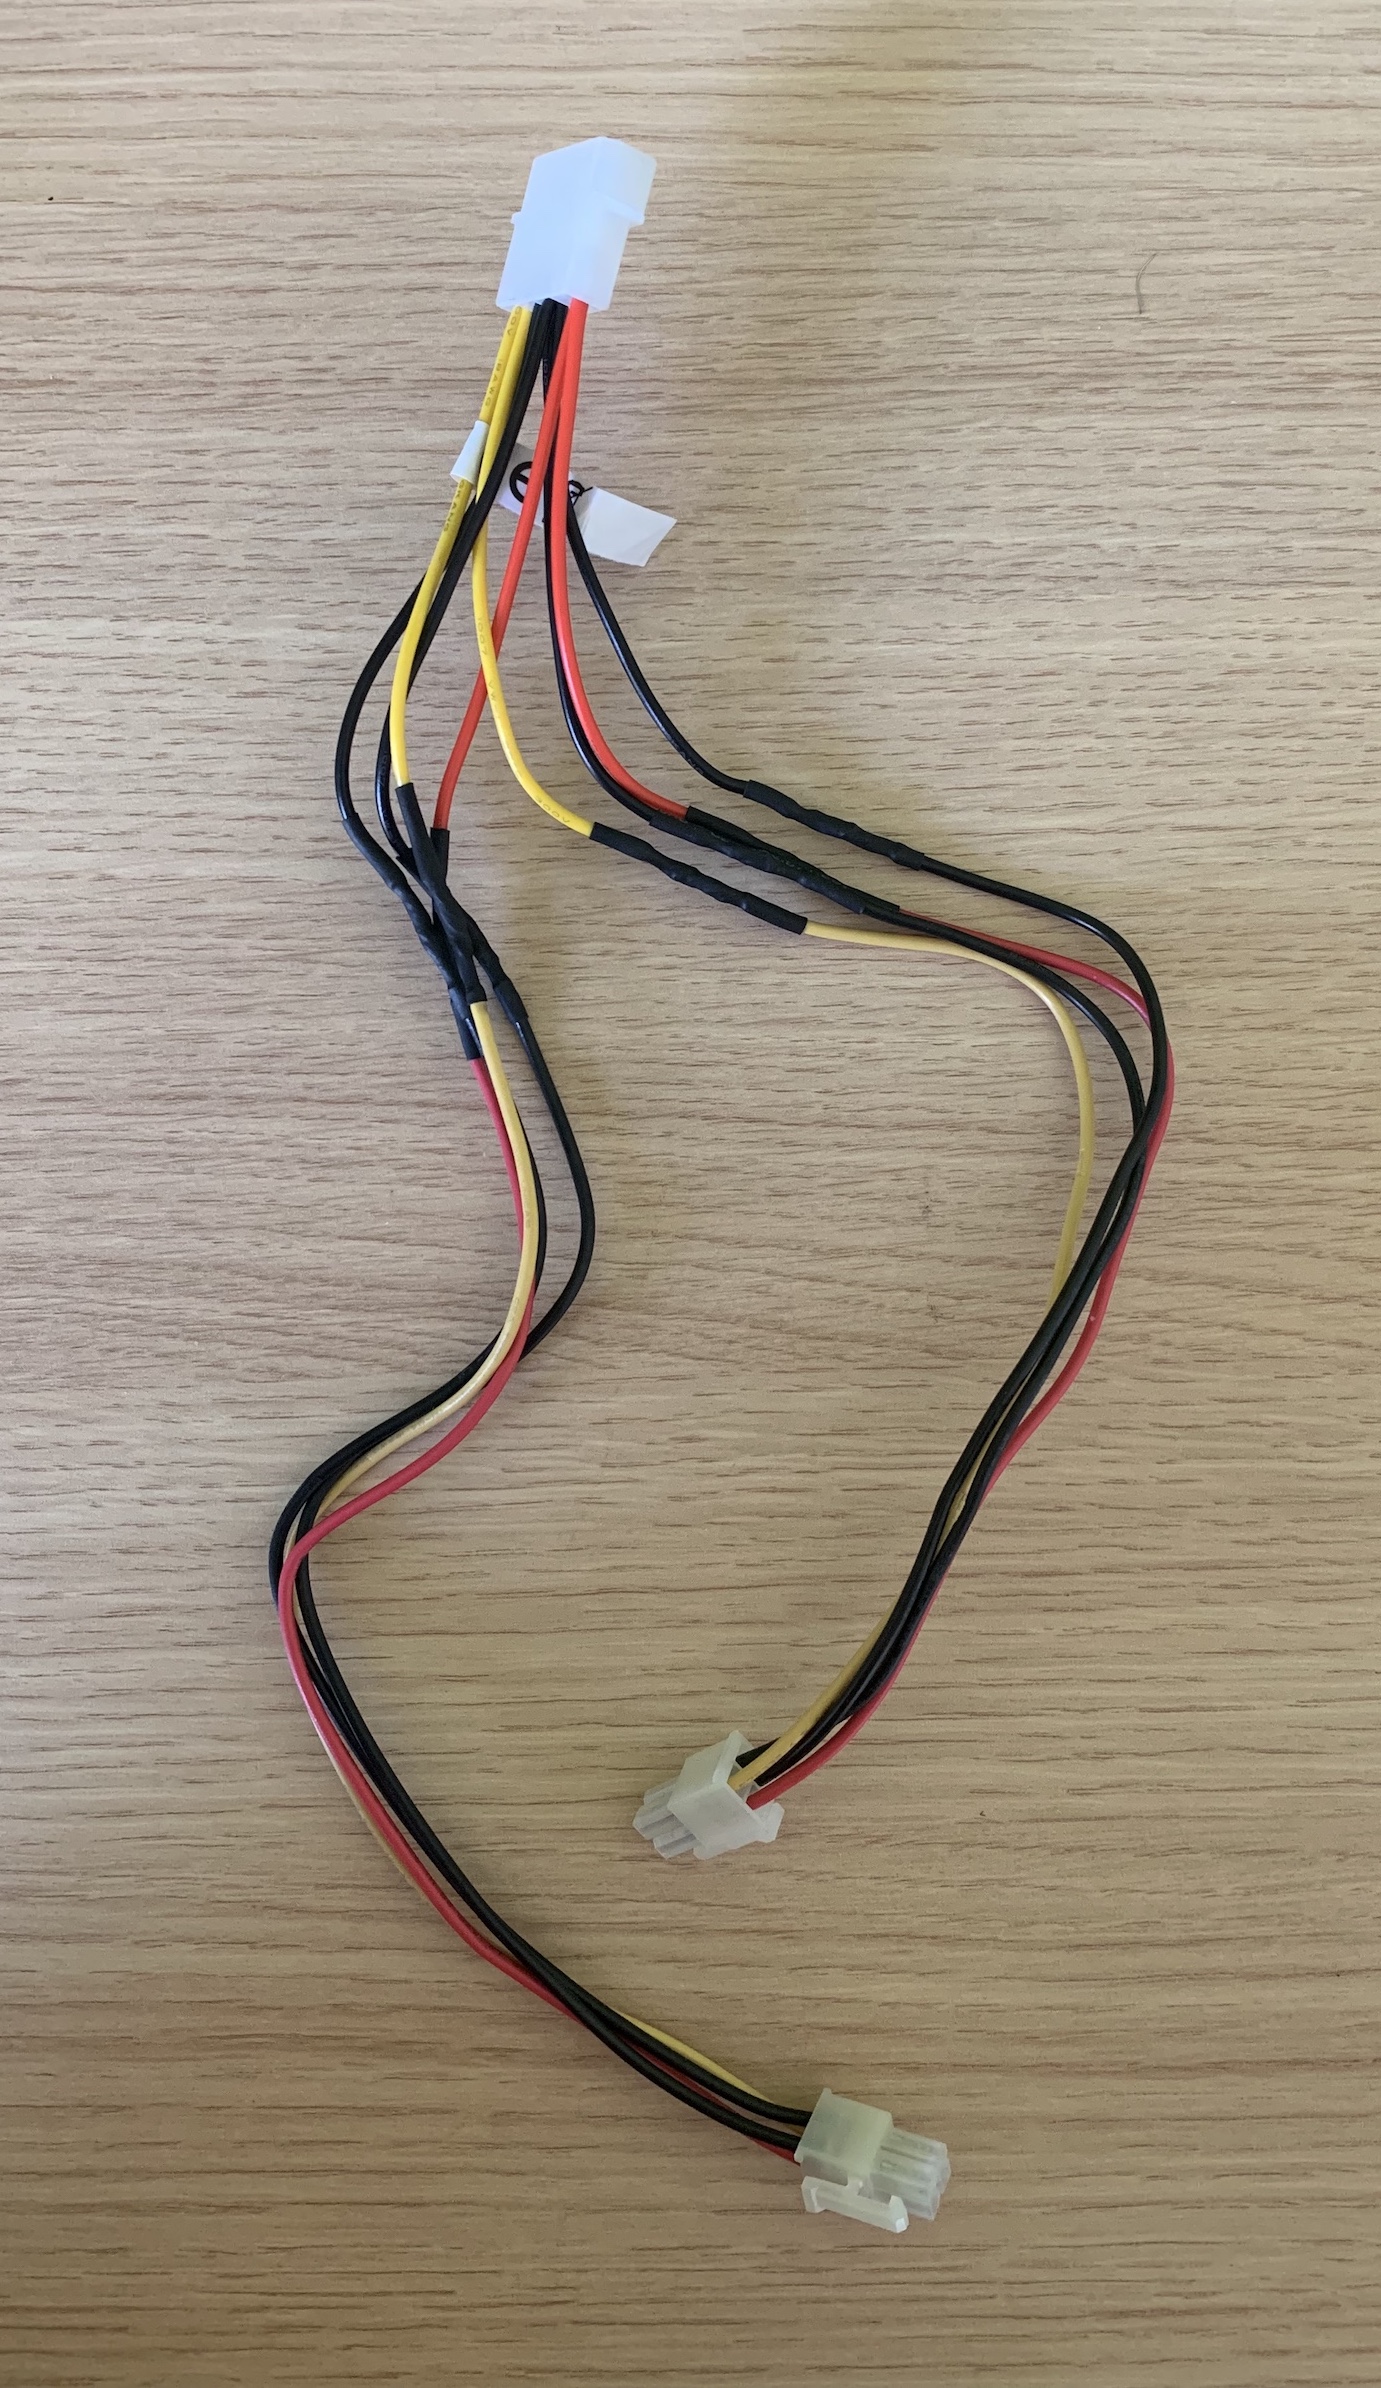 DIY Adapter for the special Molex connector